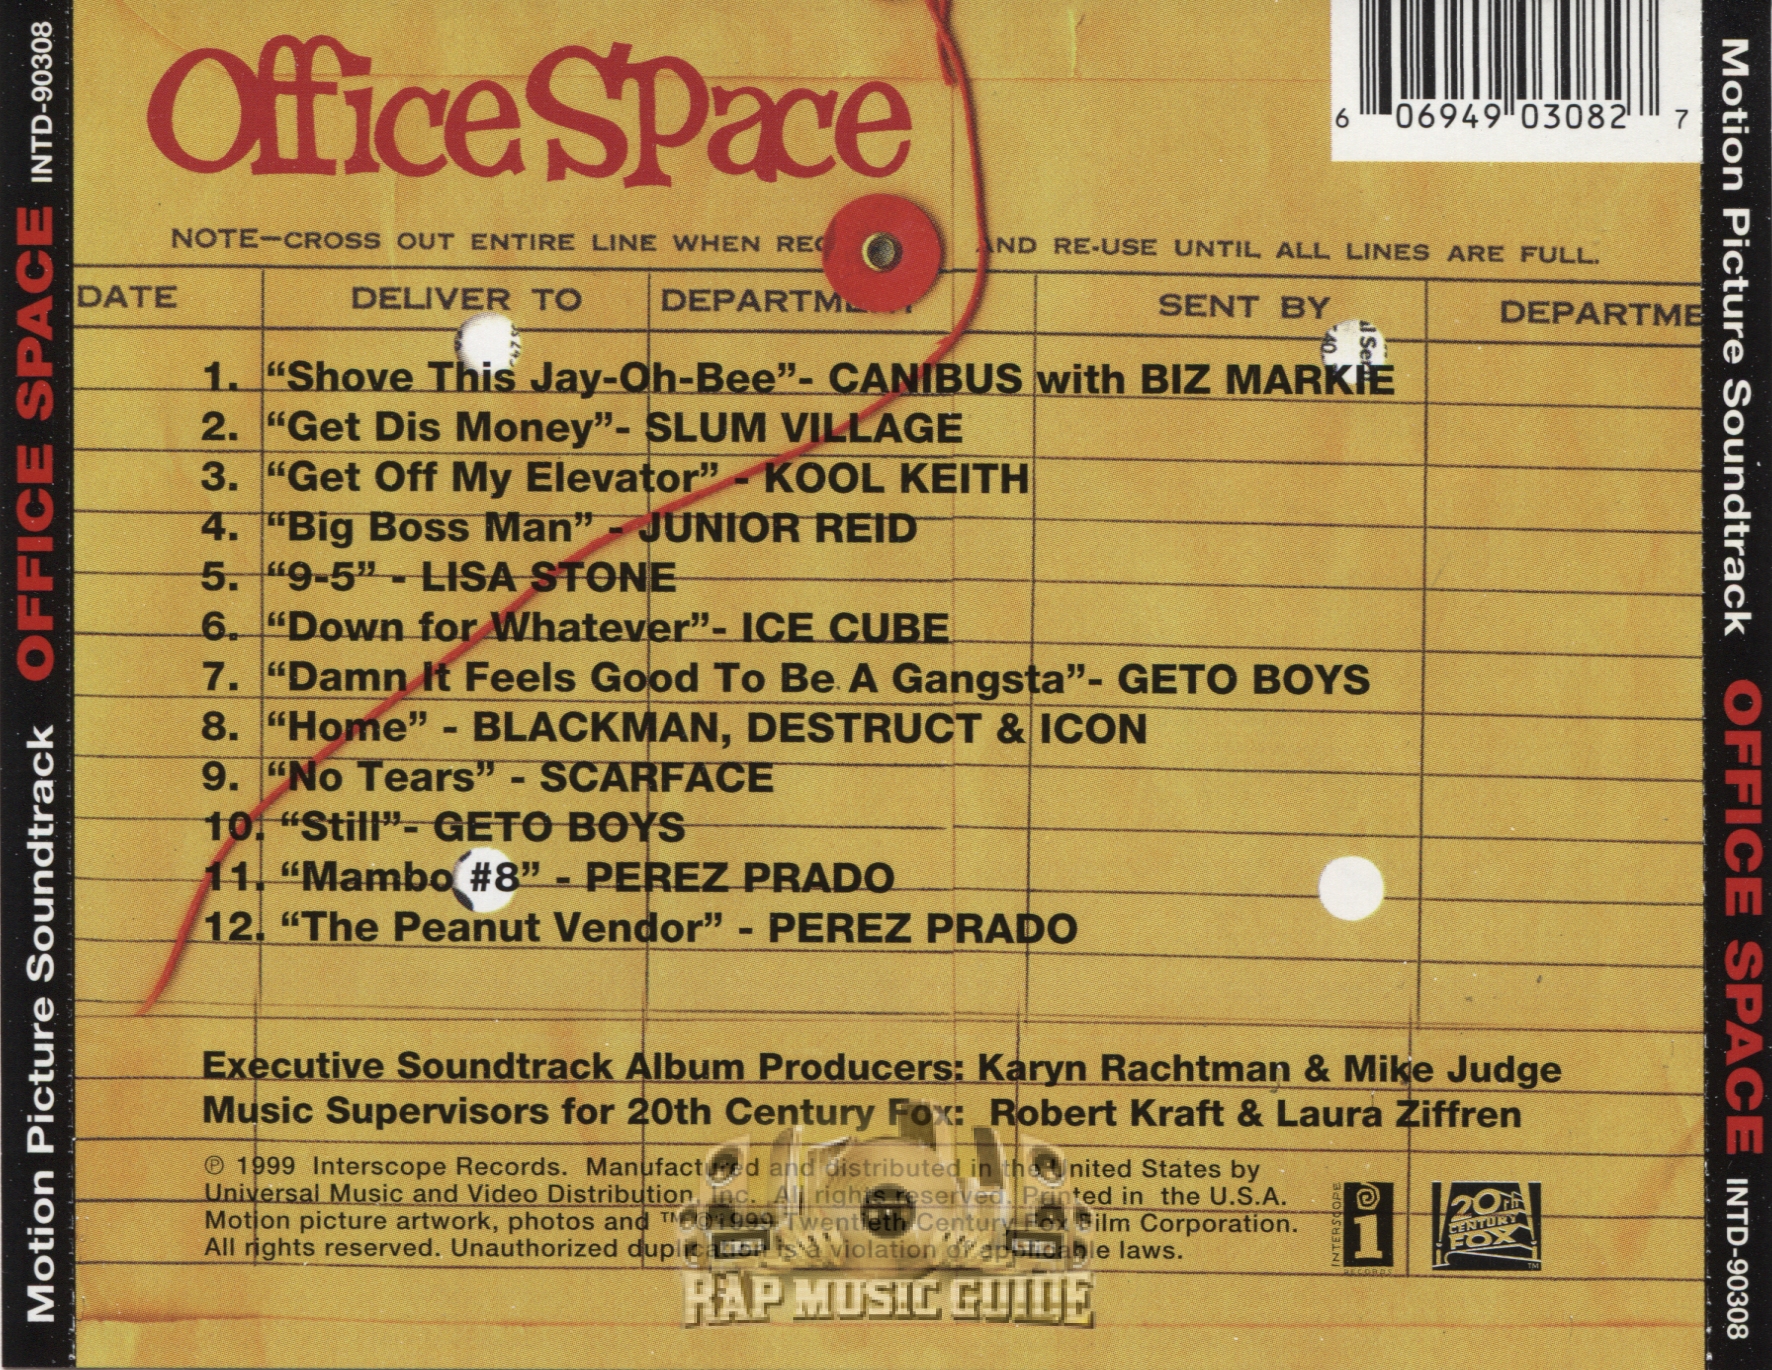 Office Space - The Motion Picture Soundtrack: CD | Rap Music Guide